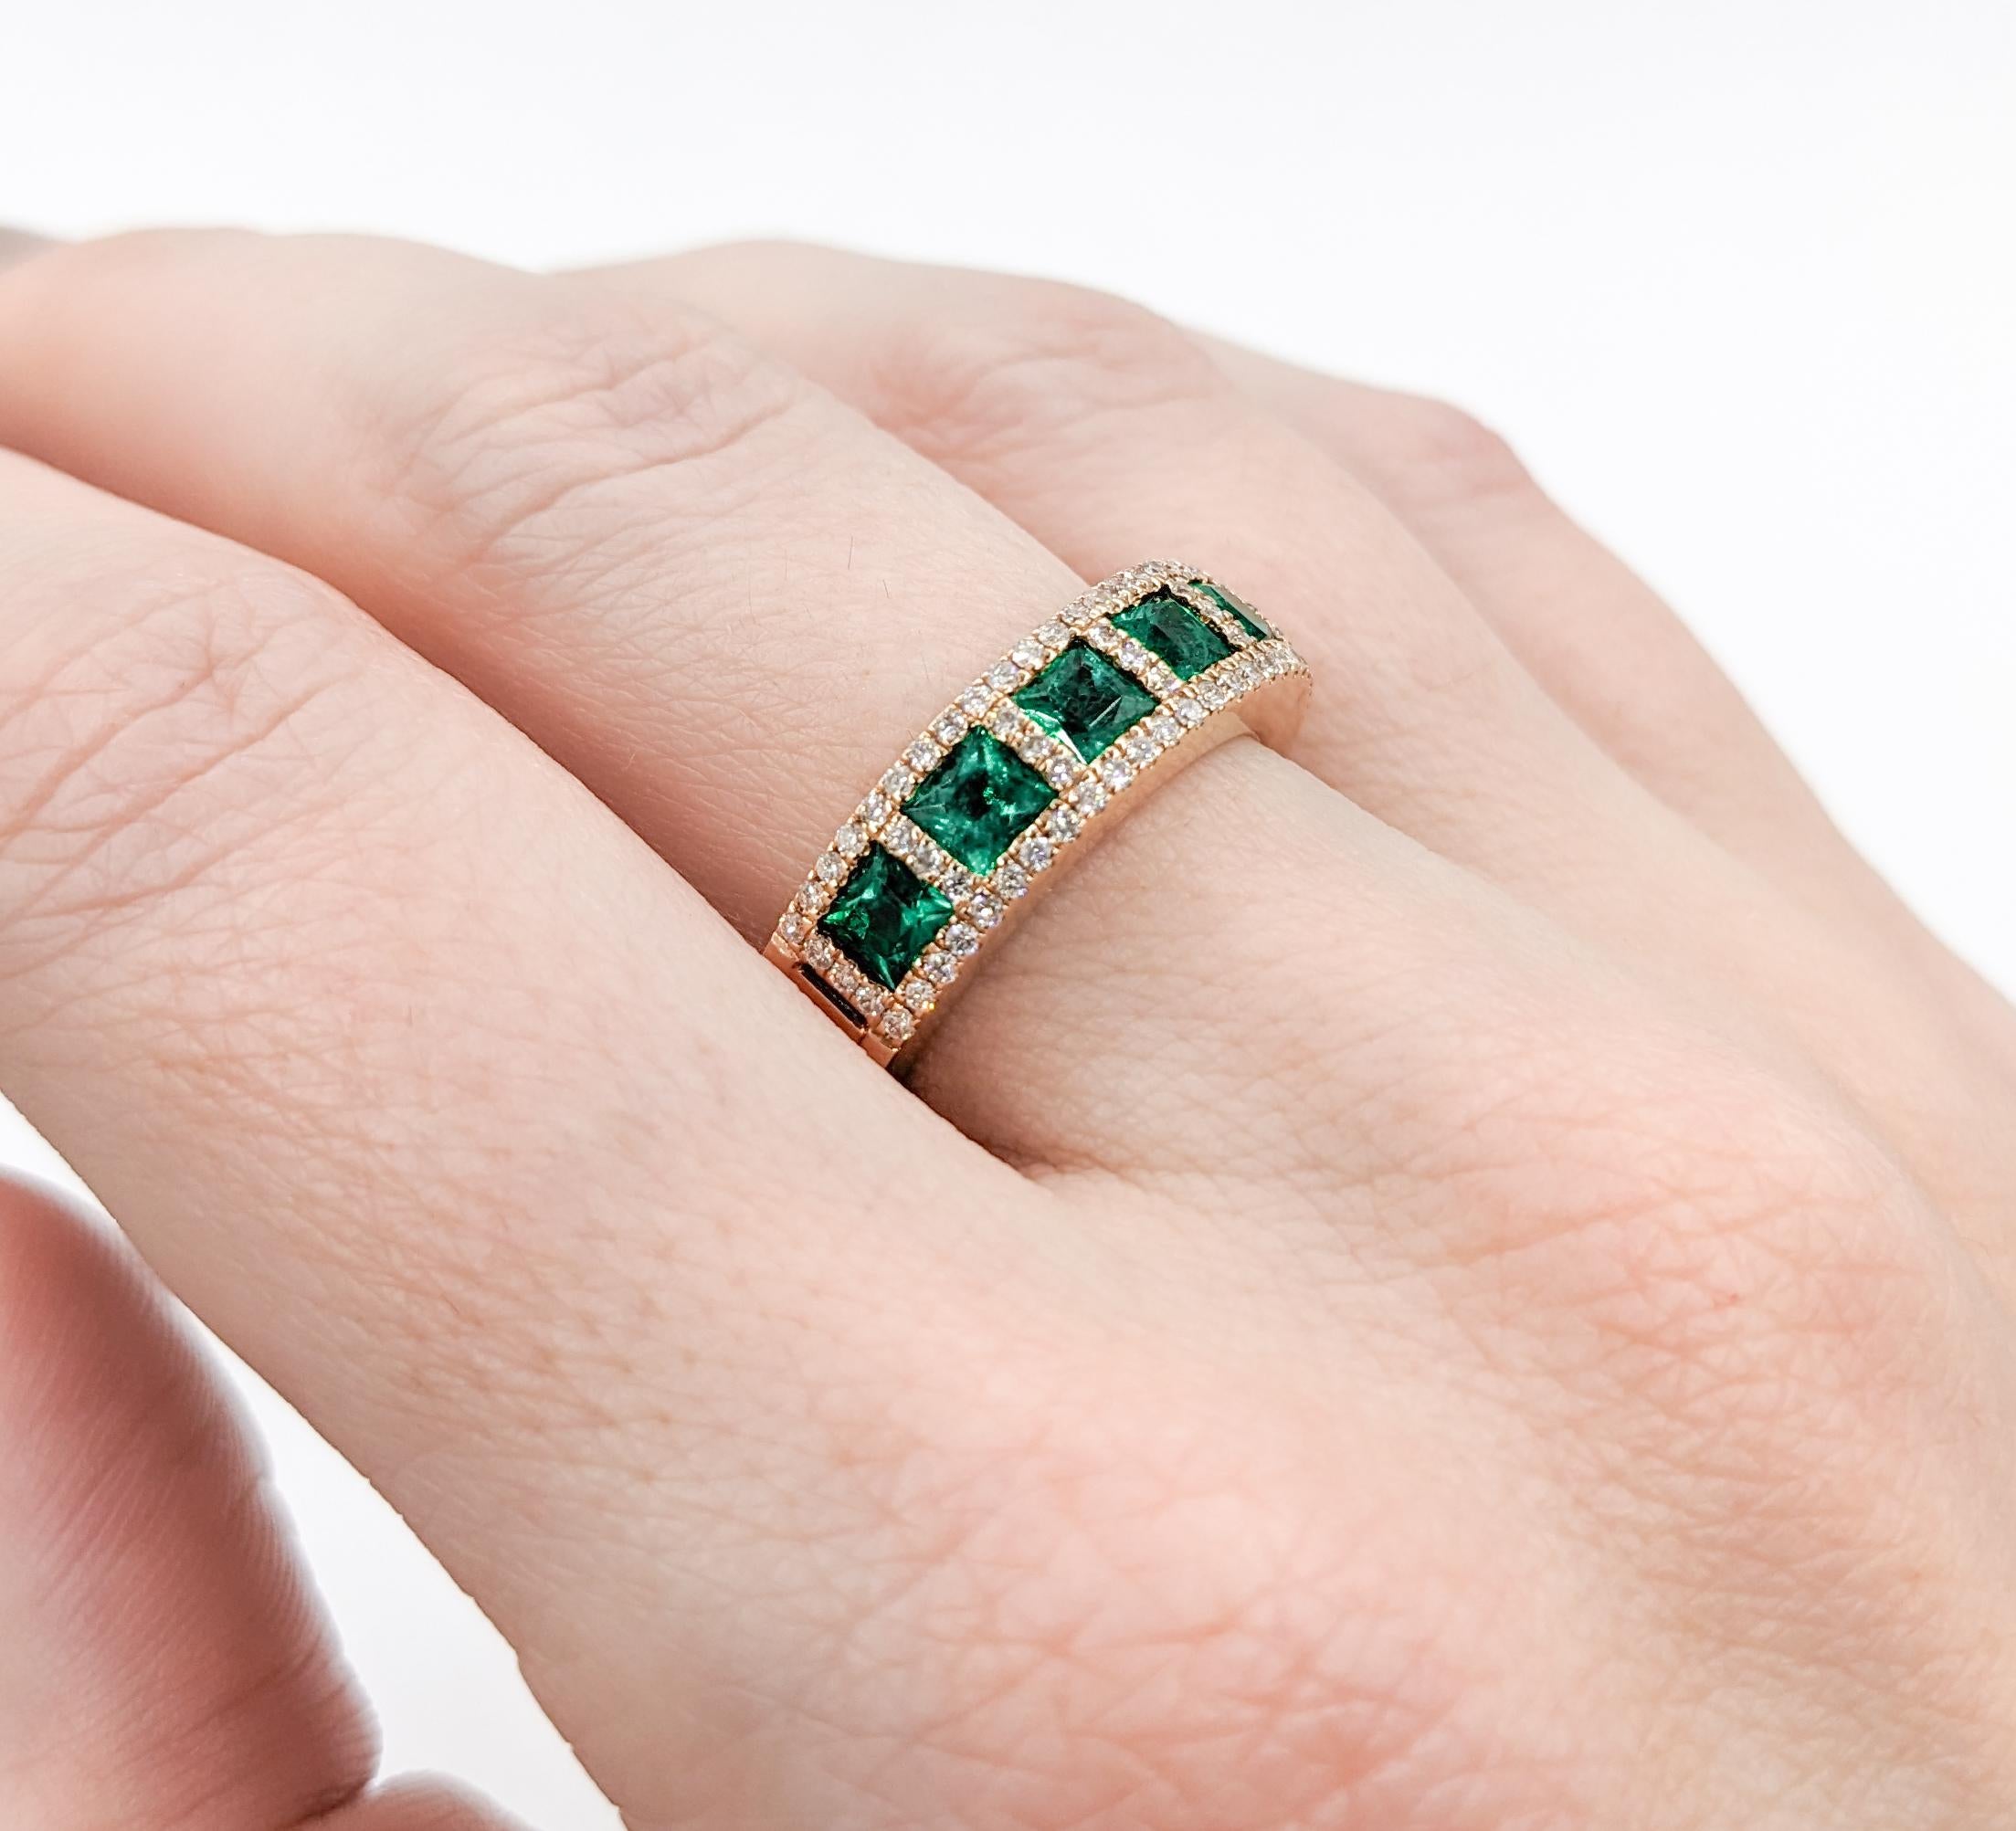 Romantic Rose Gold Emerald & Diamond Band Ring

Elevate your elegance with this captivating ring, meticulously fashioned in 14K rose gold. It showcases a set of .44ctw round diamonds beautifully complemented by 1.40ctw princess cut Emeralds, merging